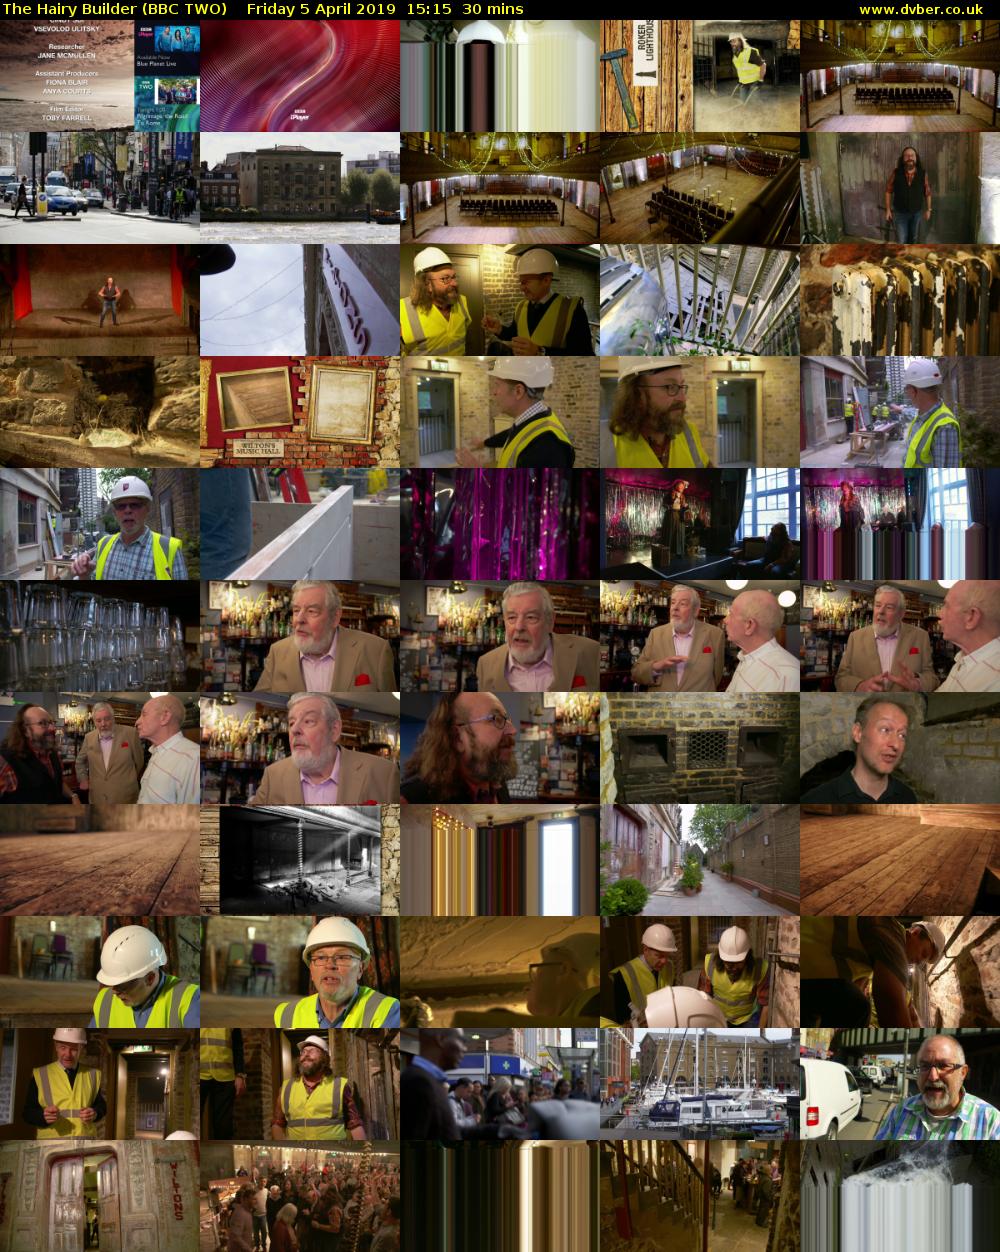 The Hairy Builder (BBC TWO) Friday 5 April 2019 15:15 - 15:45